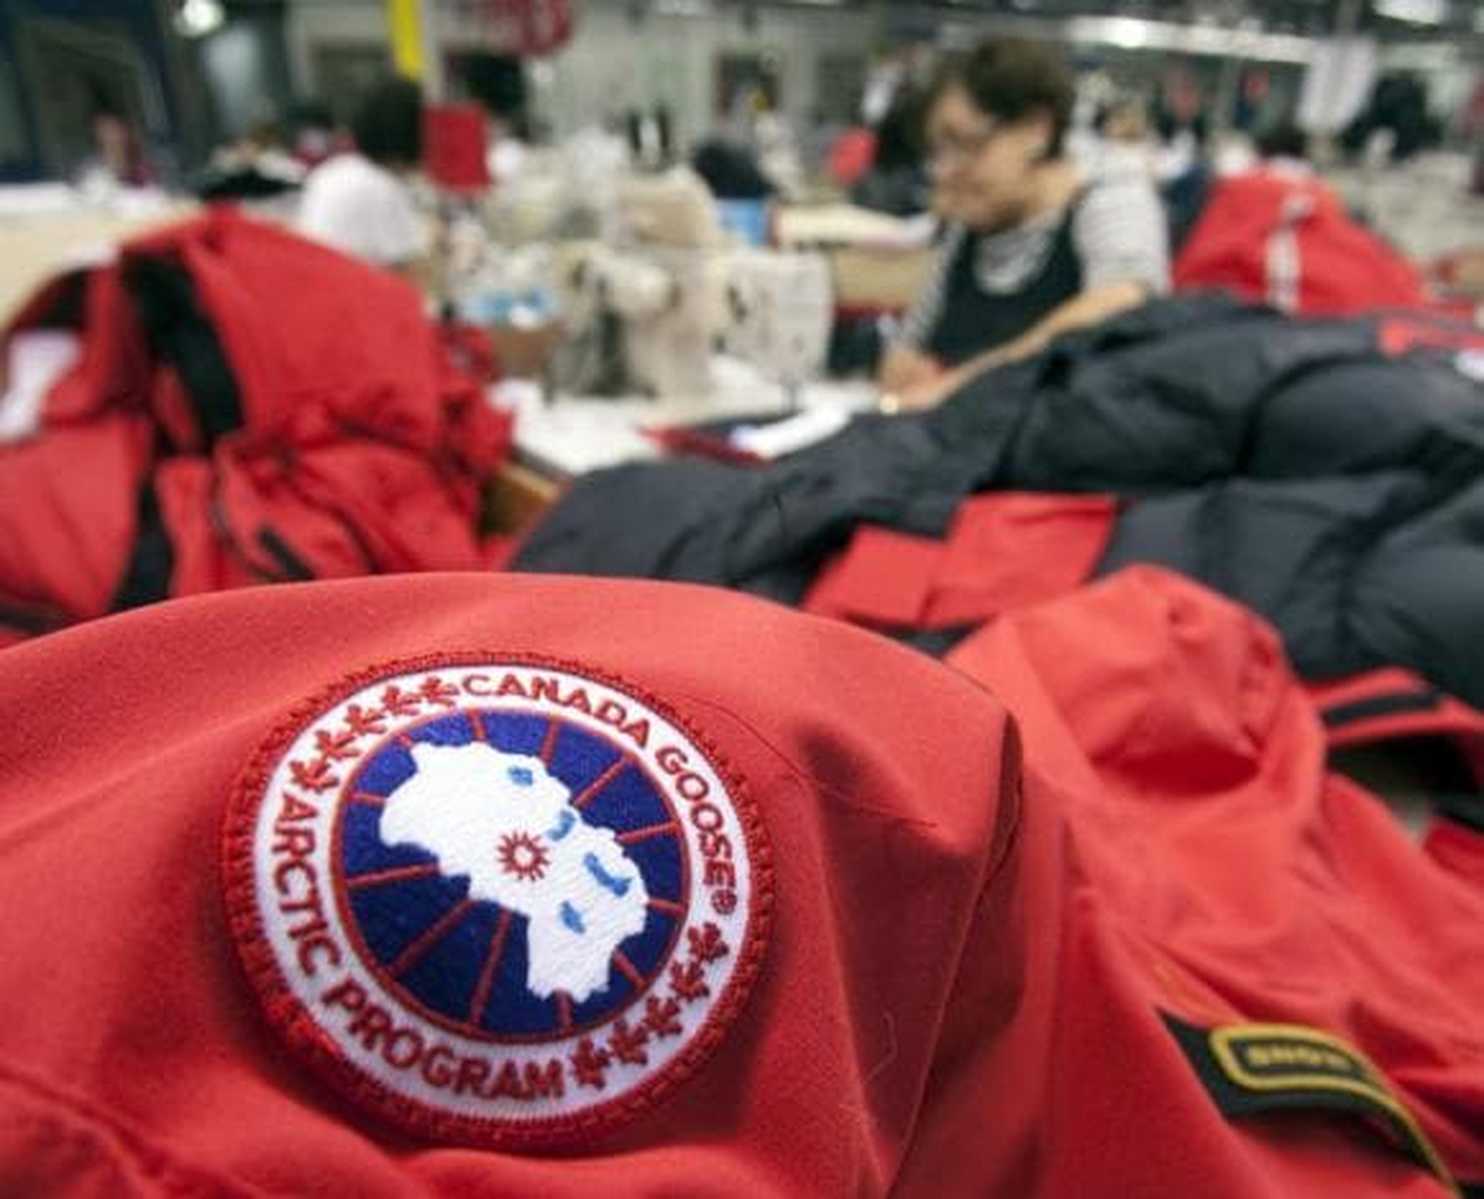 Canada Goose jackets online fake - The coolest thing at cold colleges: Warm $700-plus Canada Goose ...